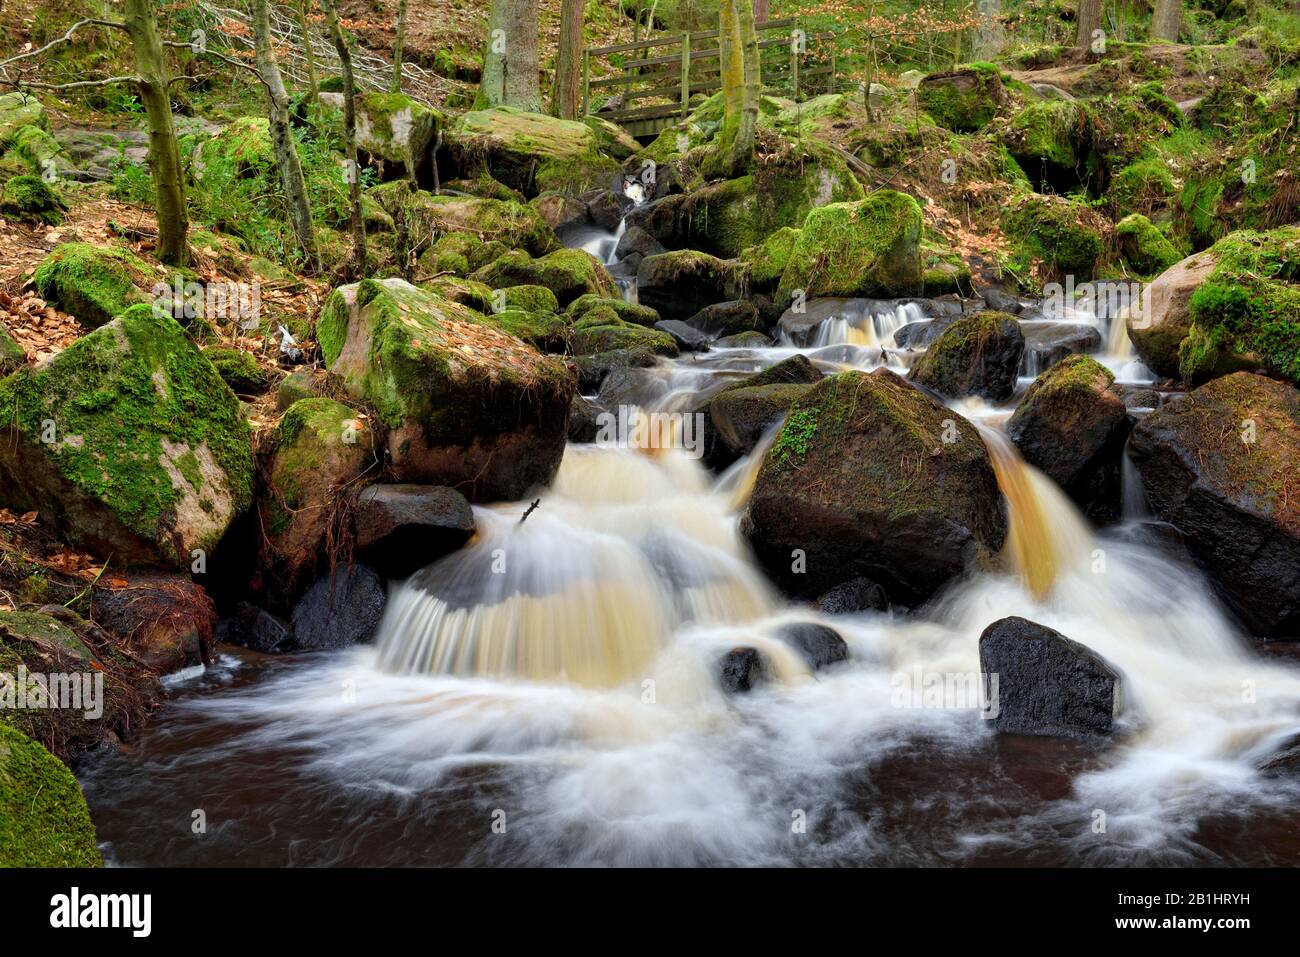 Wyming Brook,nature reserve,water fall cascades,peak district,Sheffield,England,UK Stock Photo